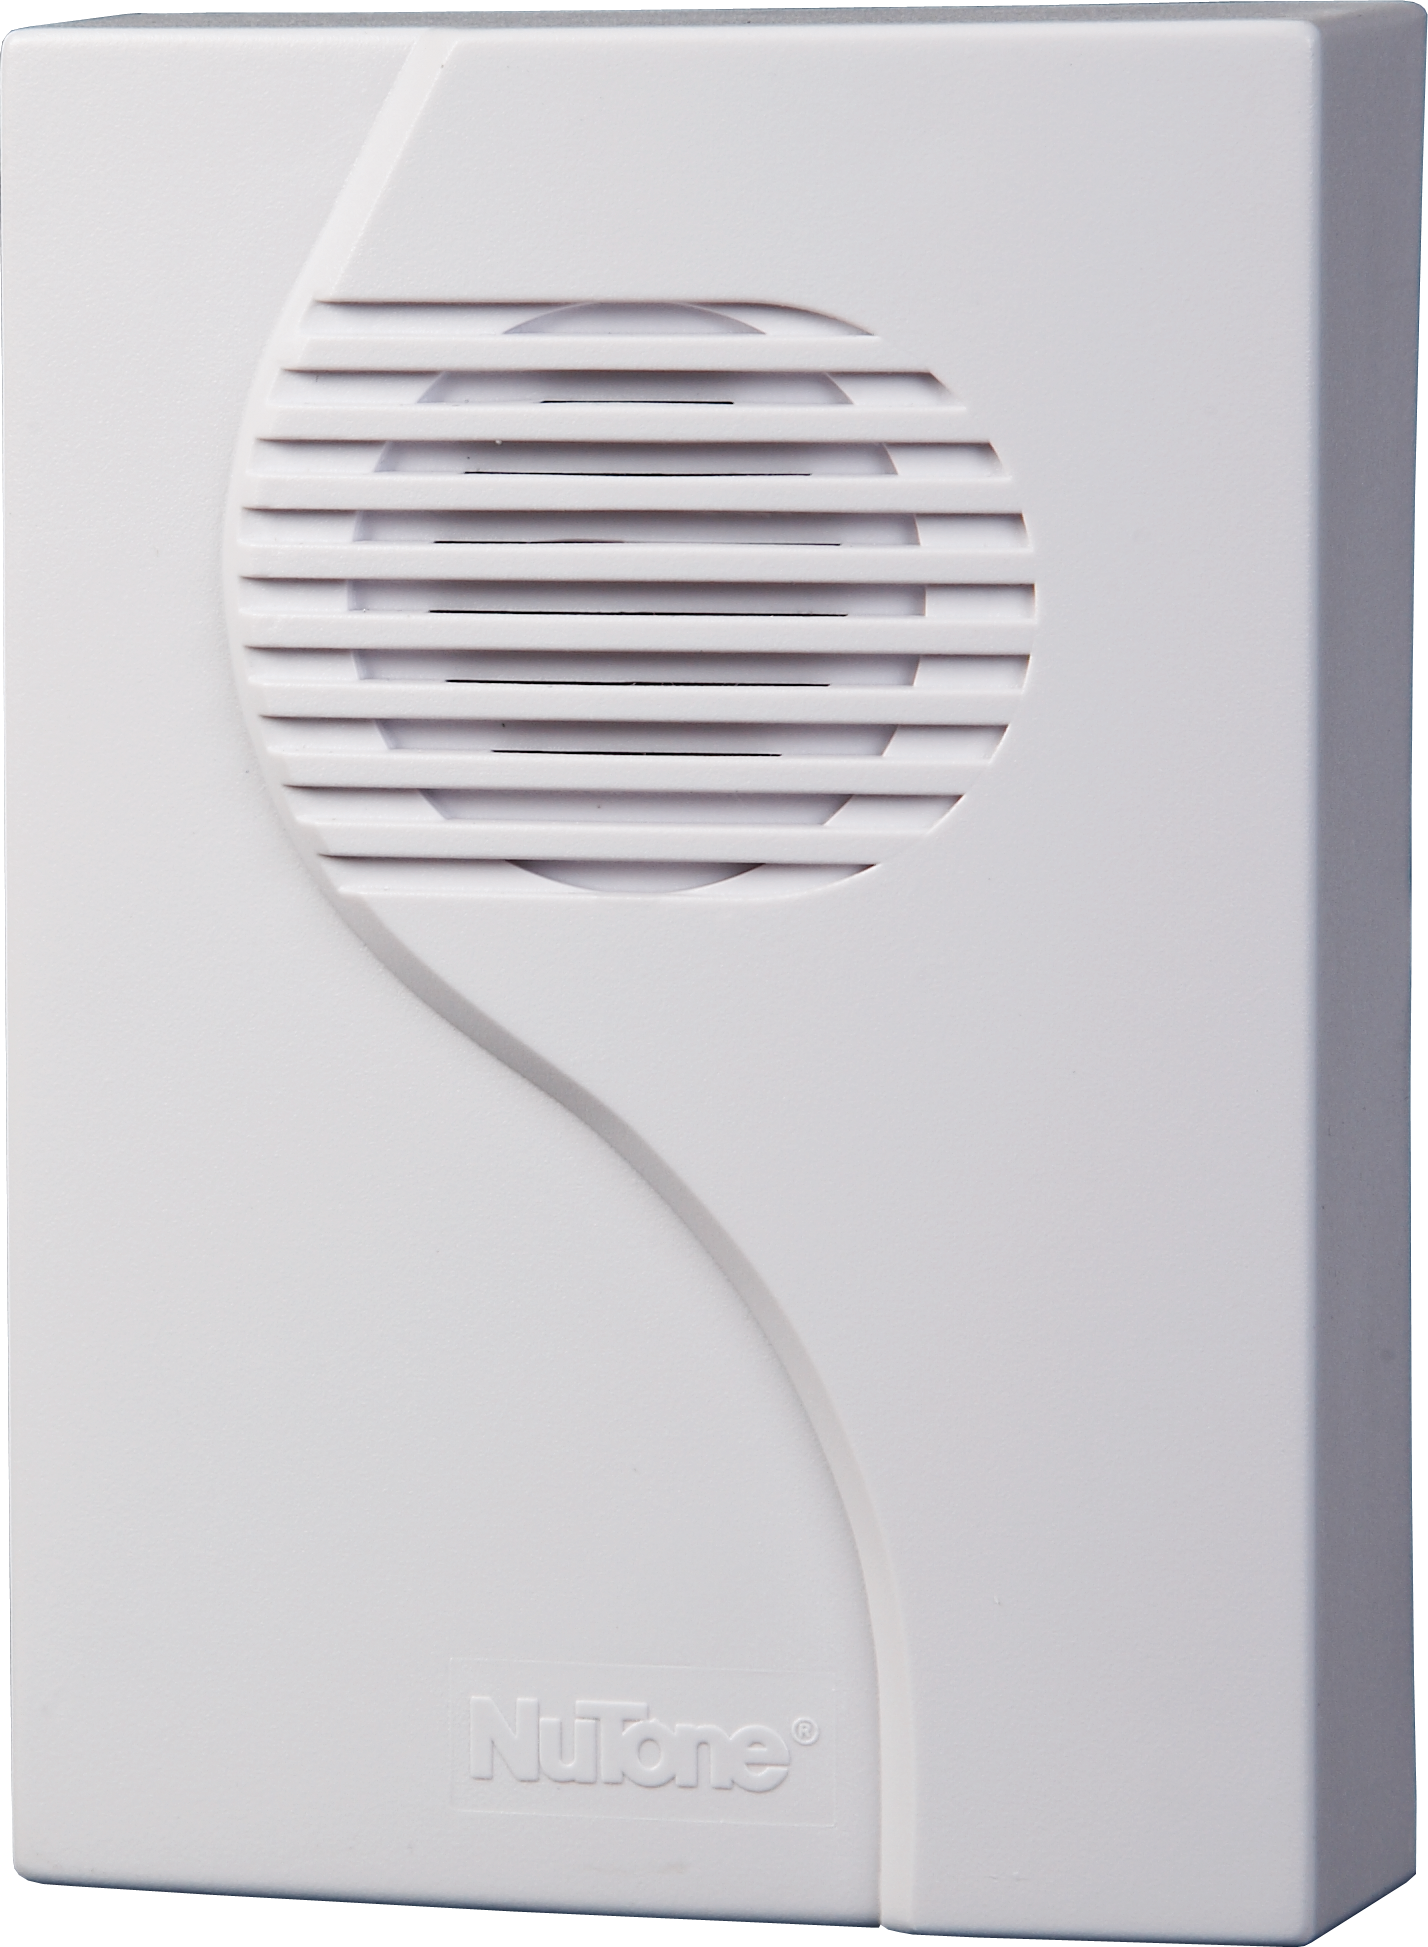 NUTO LA223WH 4 OR 8 NOTE WIRELESS PLUG-IN DOOR CHIME